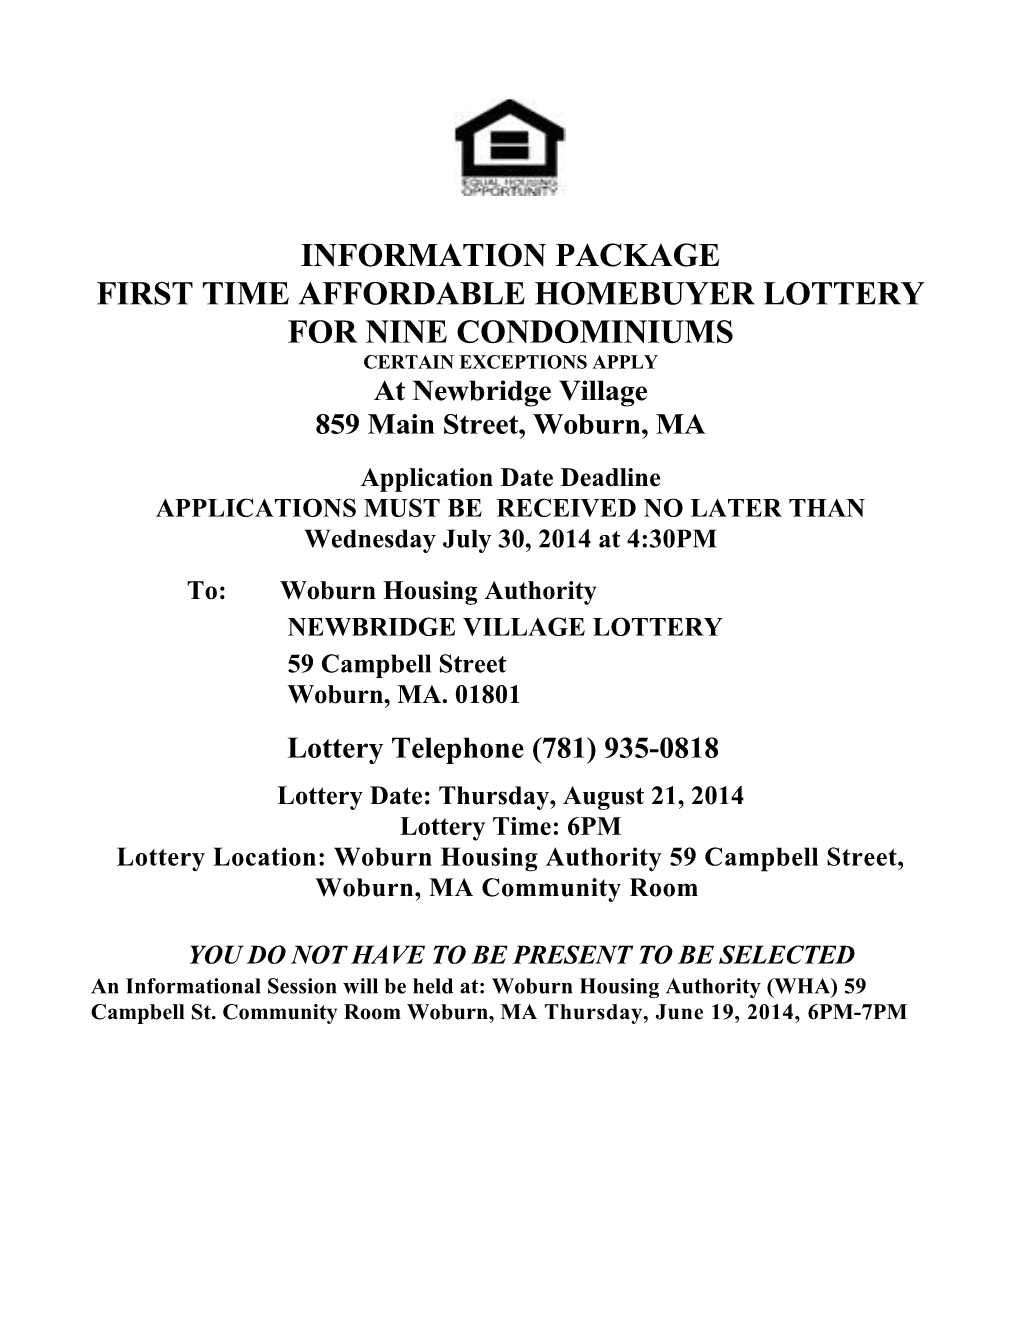 First Time Affordable Homebuyer Lottery